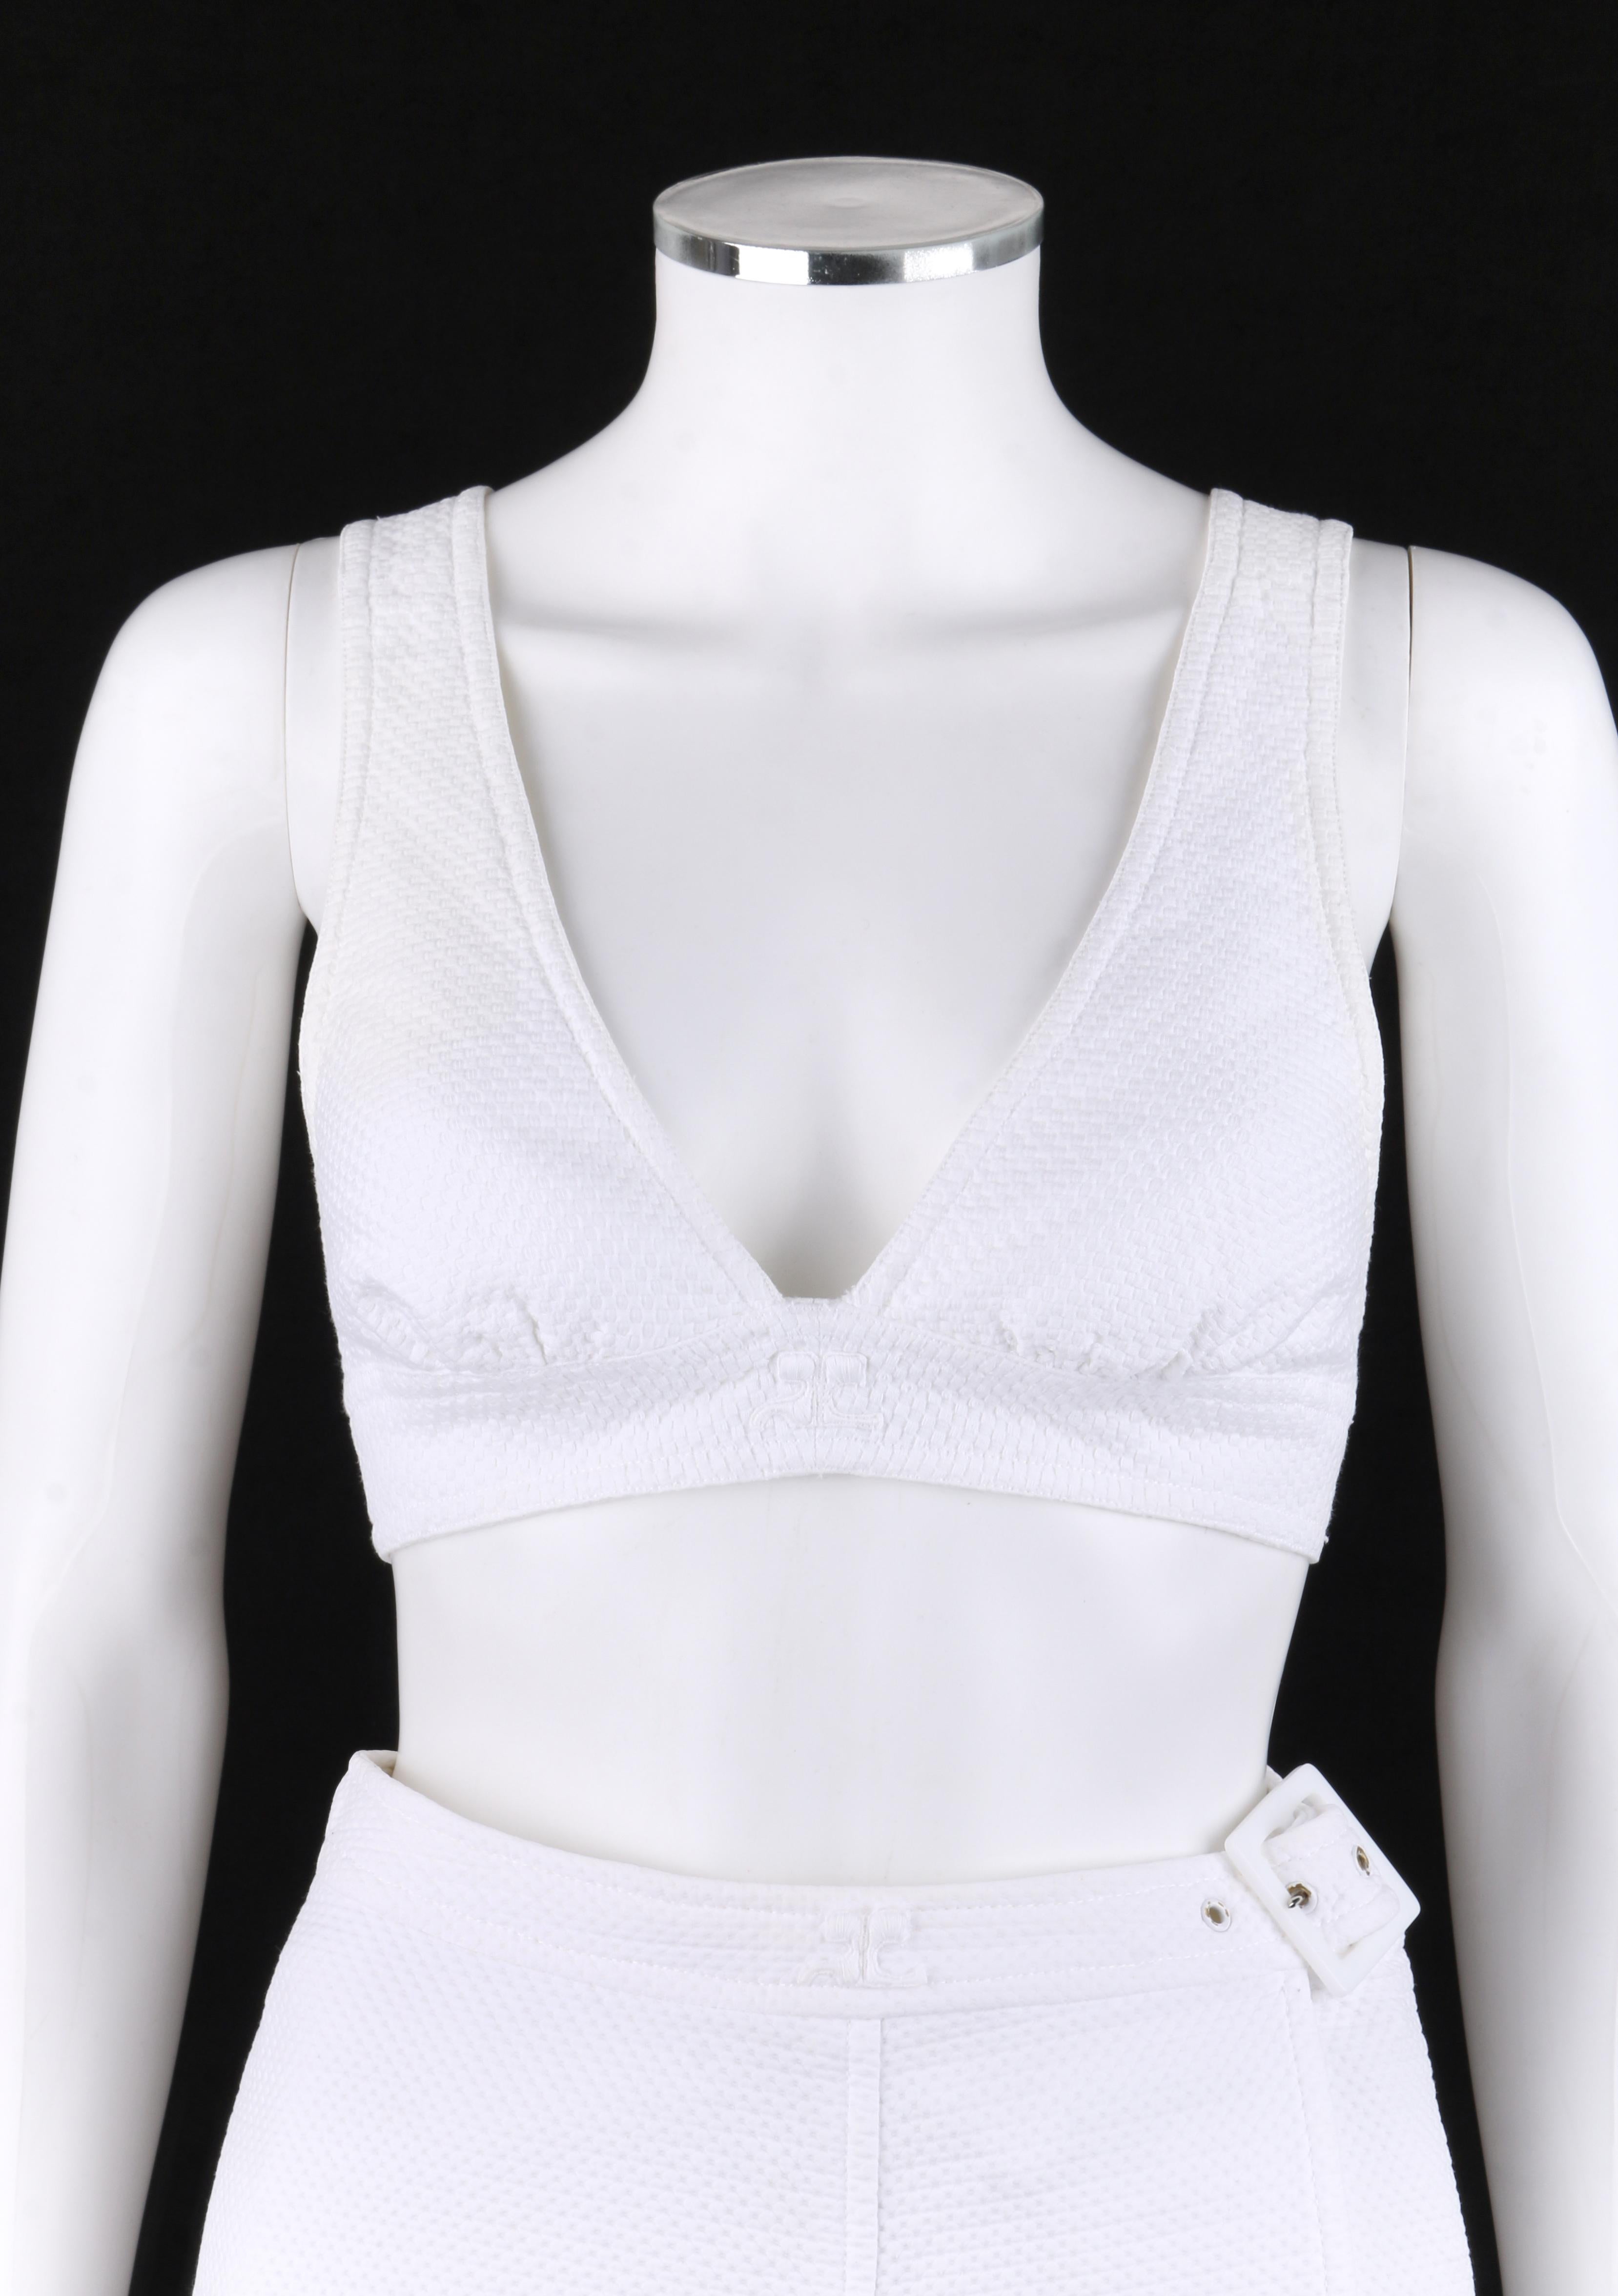 COURREGES c.1970’s 2 Pc White Textured Bralette Tank Top Belted Wrap Skirt Set
 
Circa: 1970’s
Label(s): Courreges Paris / Made in France  
Style: Bralette top and wrap skirt.
Color(s): White 
Lined: No
Marked Fabric Content: 100% Cotton
Additional